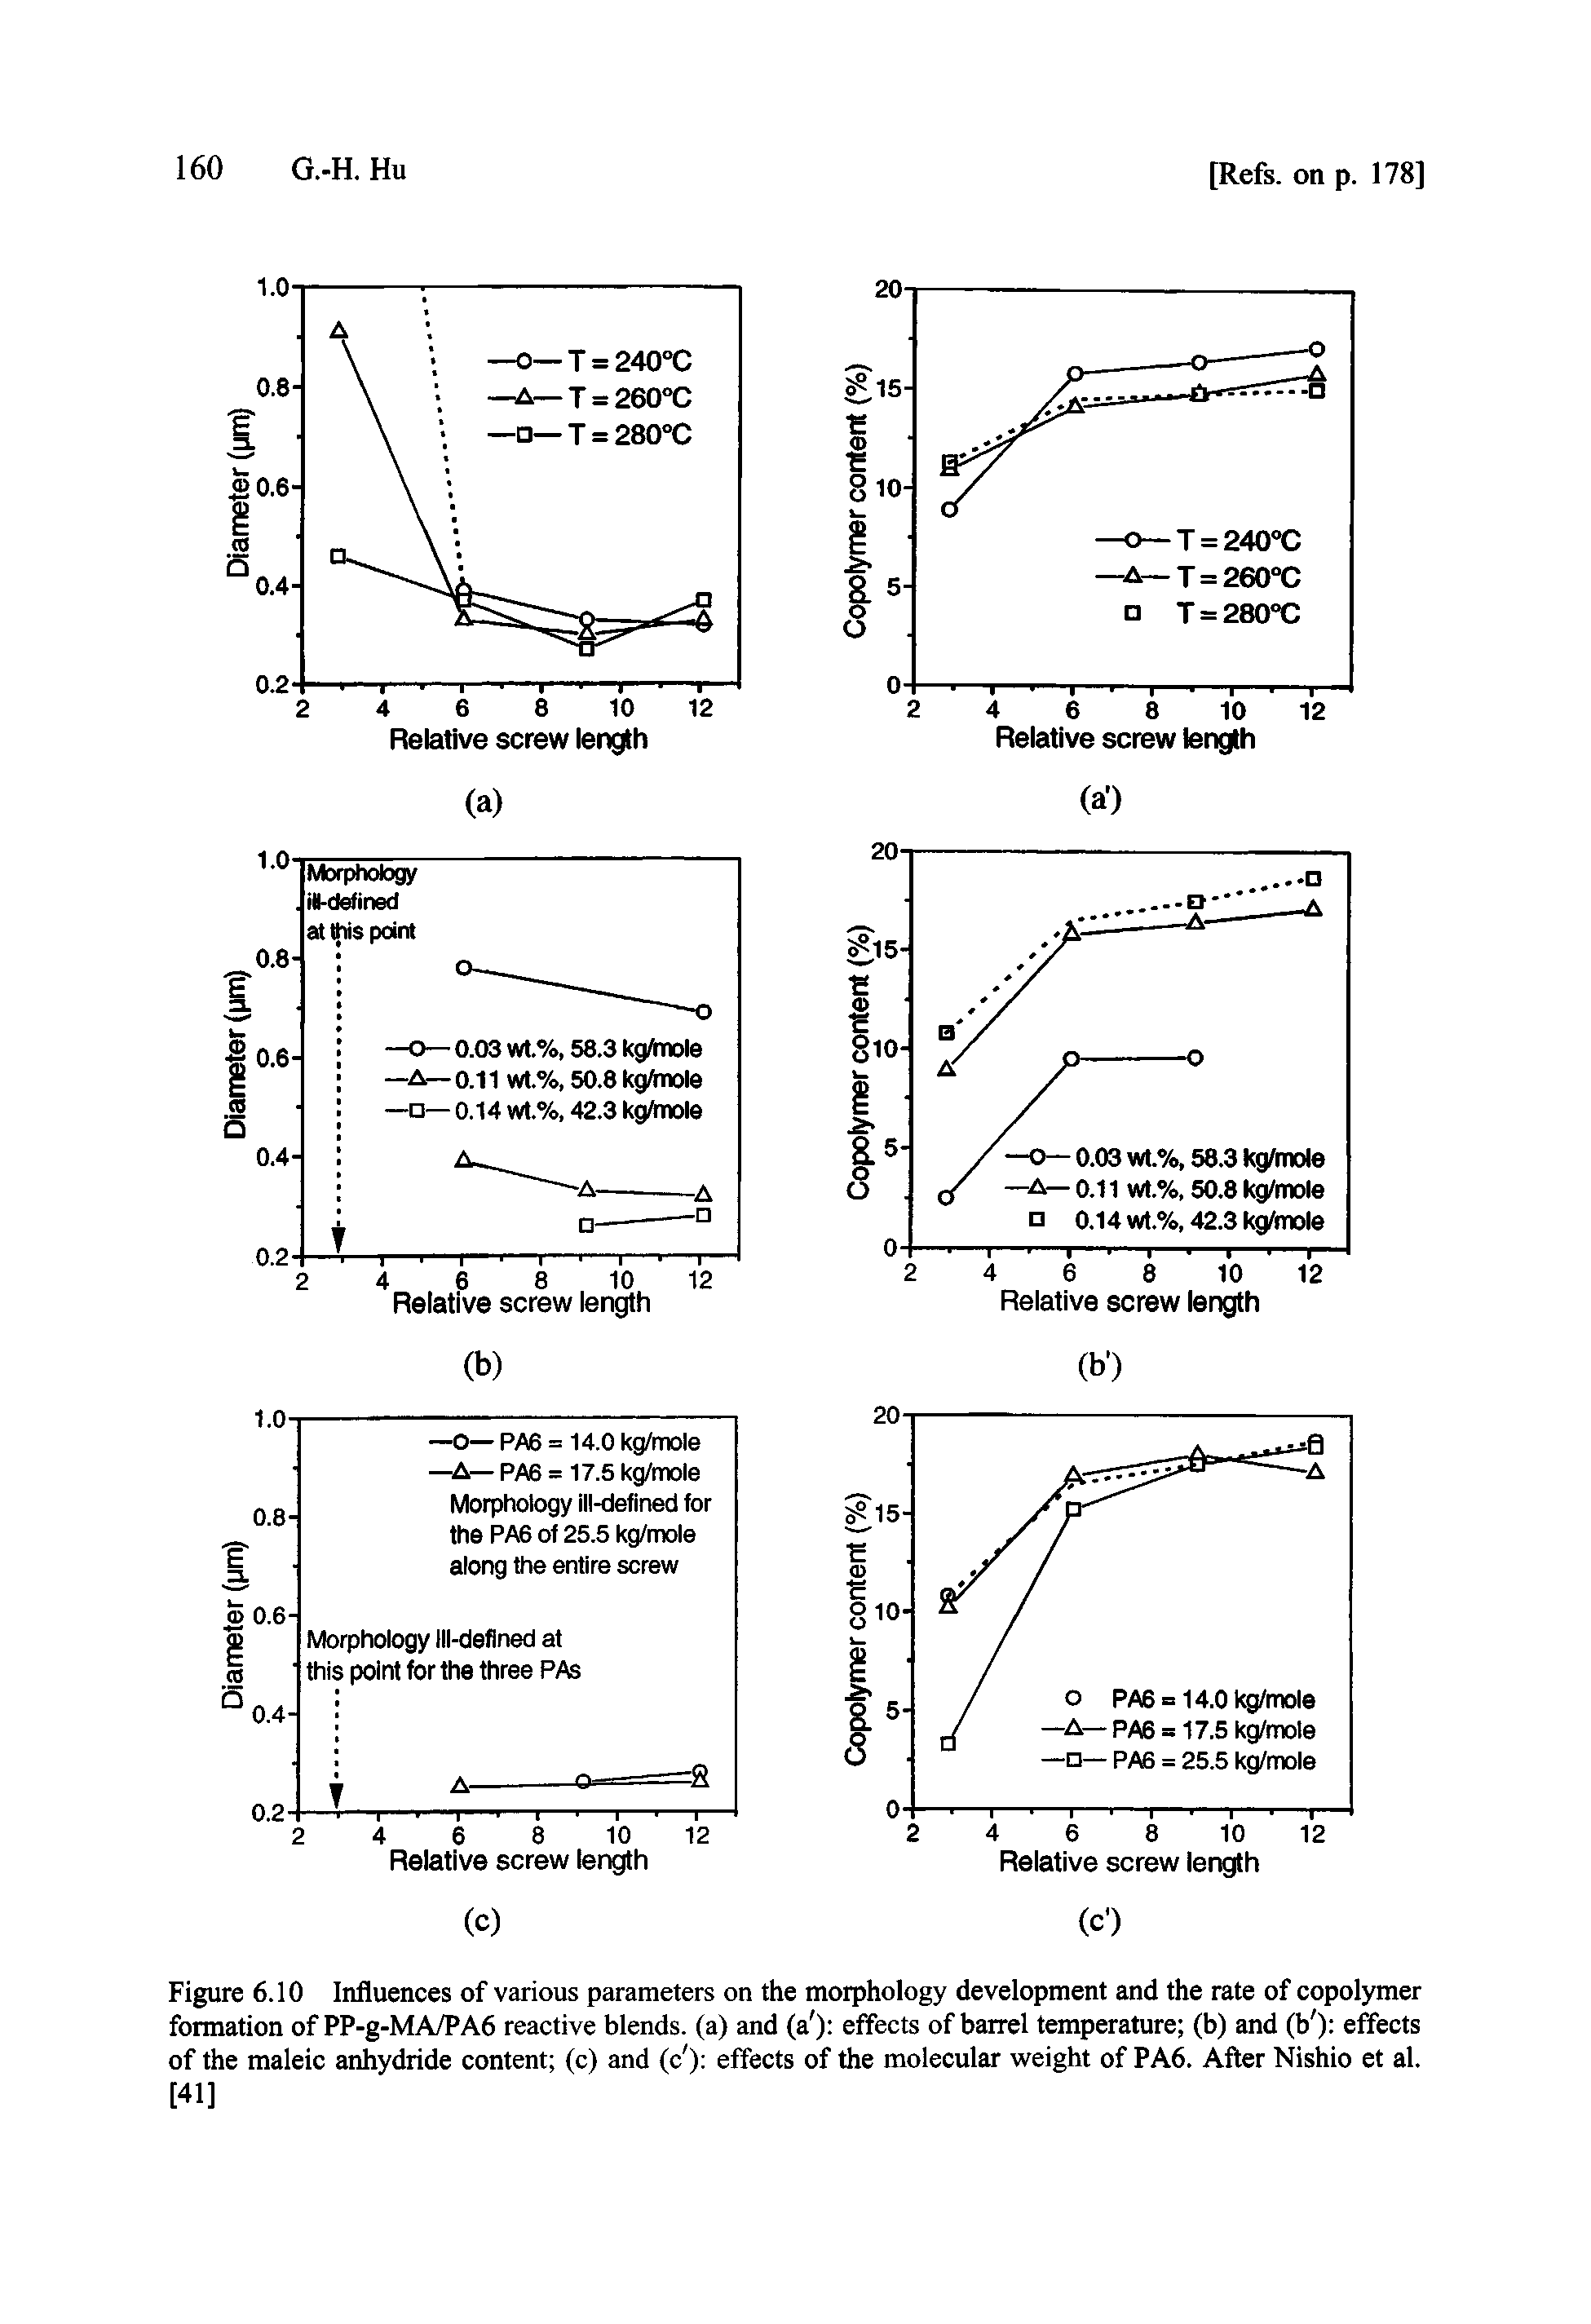 Figure 6.10 Influences of various parameters on the morphology development and the rate of copolymer formation of PP-g-MA/PA6 reactive blends, (a) and (a ) effects of barrel temperature (b) and (b ) effects of the maleic anhydride content (c) and (c ) effects of the molecular weight of PA6. After Nishio et al. [41]...